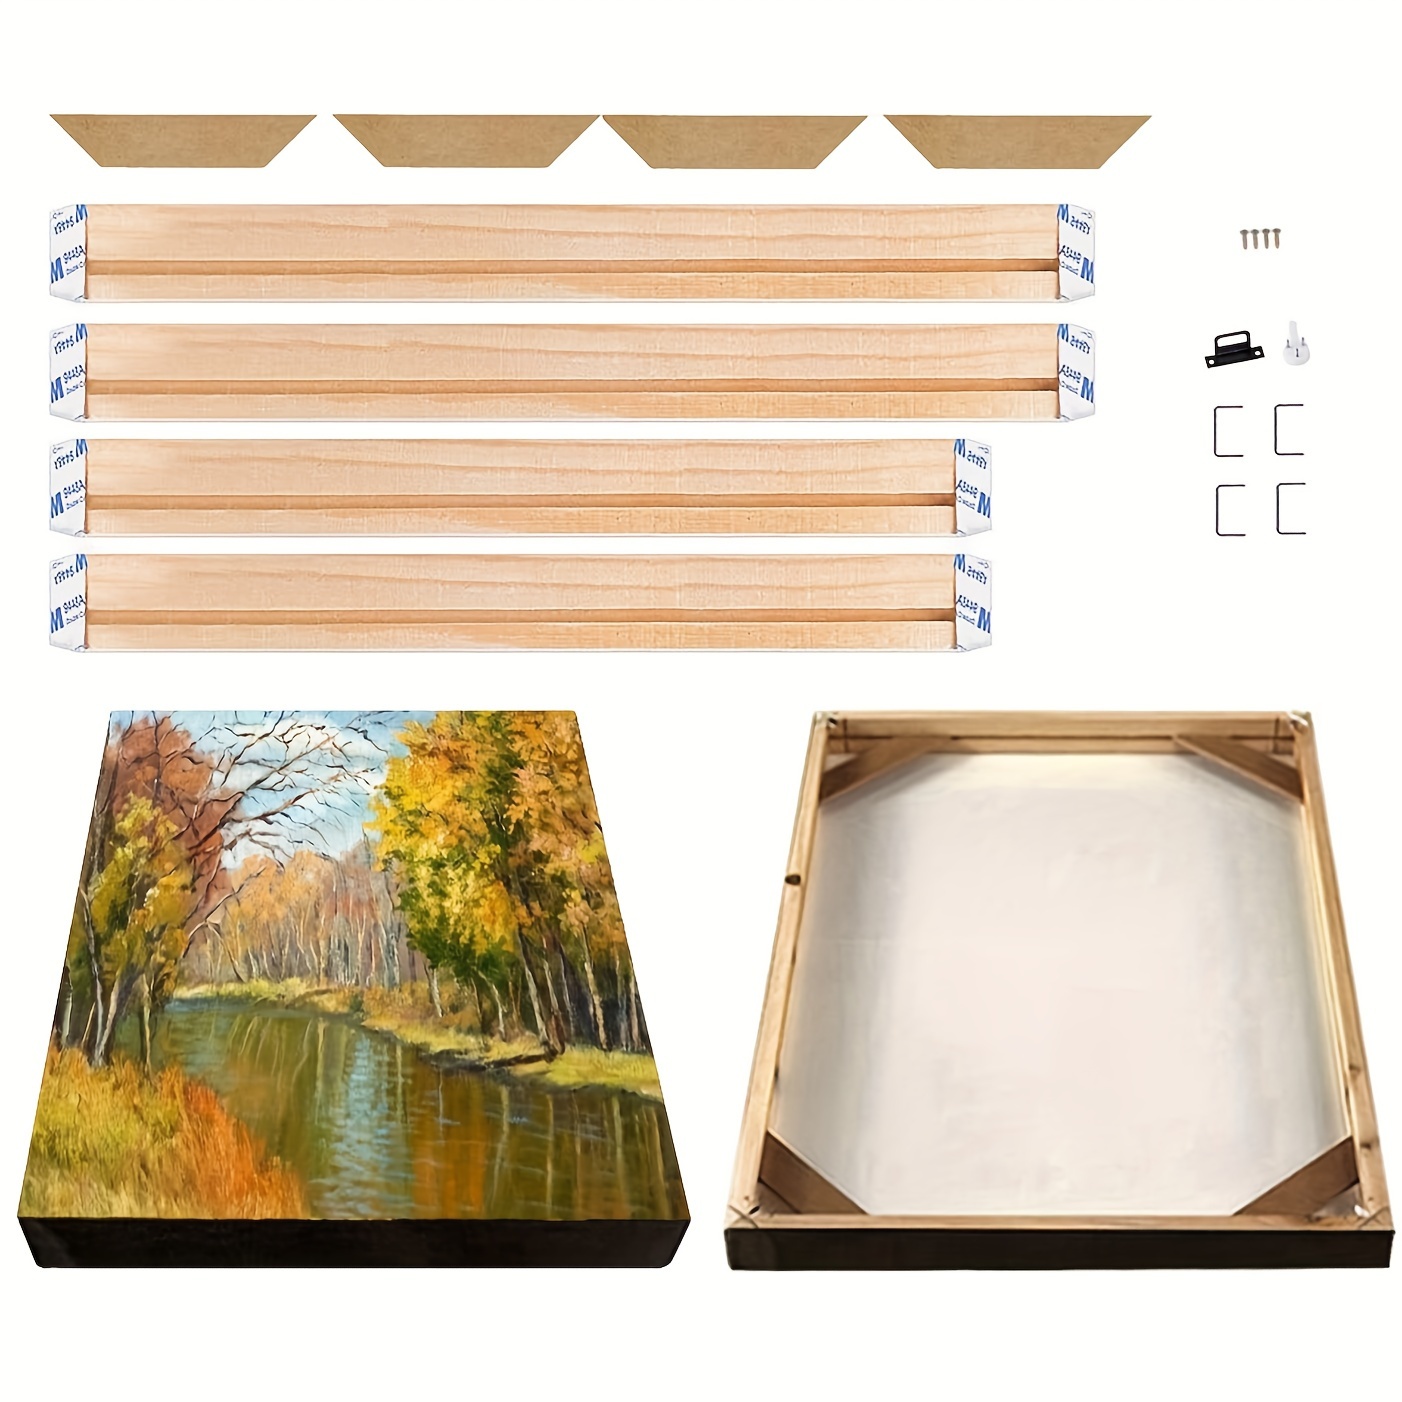  DIY Canvas Stretcher Bars - 8x8 Inch Wood Canvas Frame - Easy  to Assemble, Gallery Wall Wrapped Canvas Oil Frame Kits Canvas Tools &  Accessories for Oil Paintings, Prints, Paint by